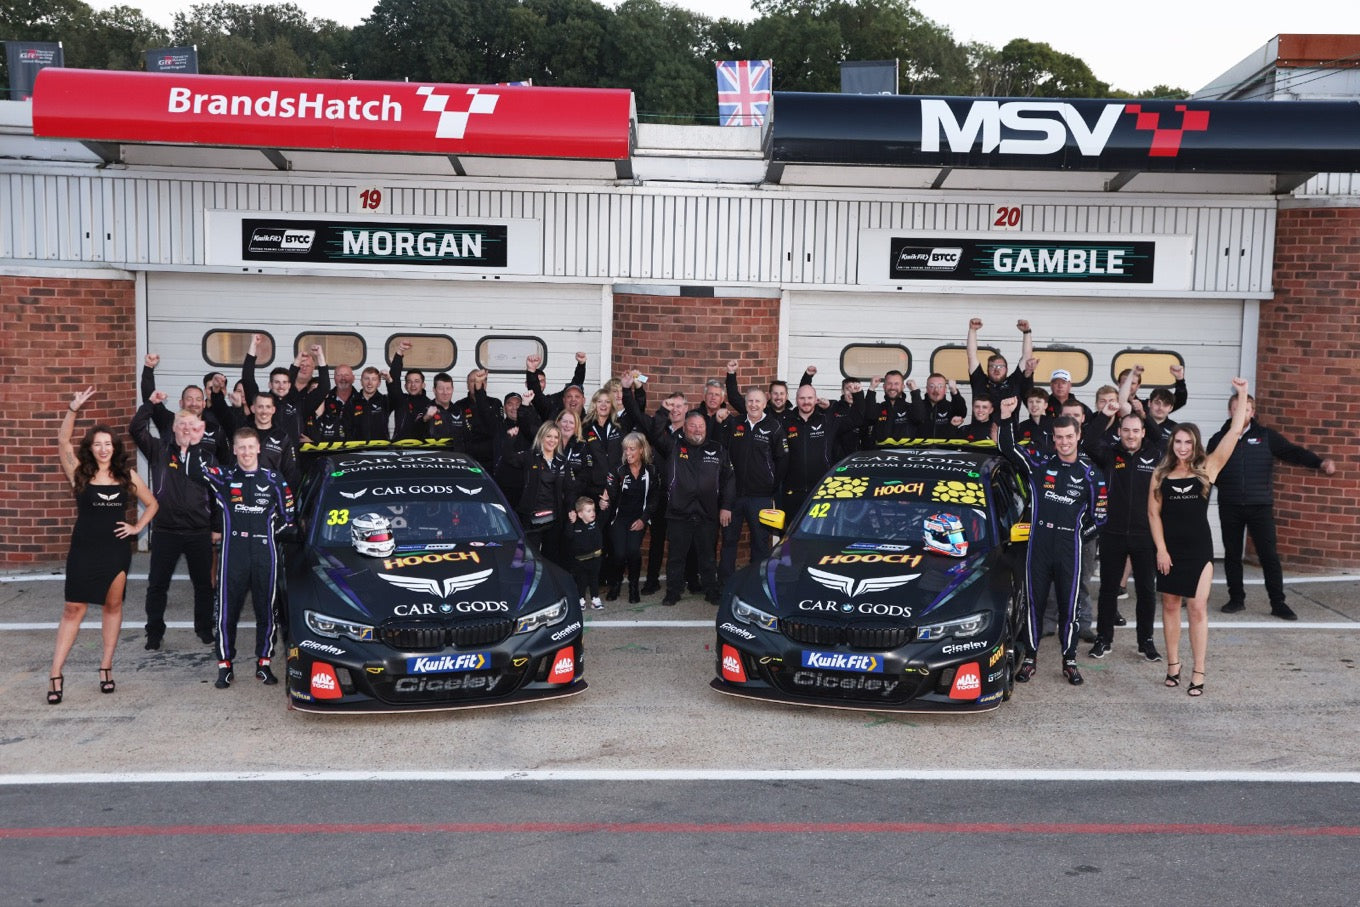 Strong Finish At Brands Hatch - Tenth BTCC Race Results